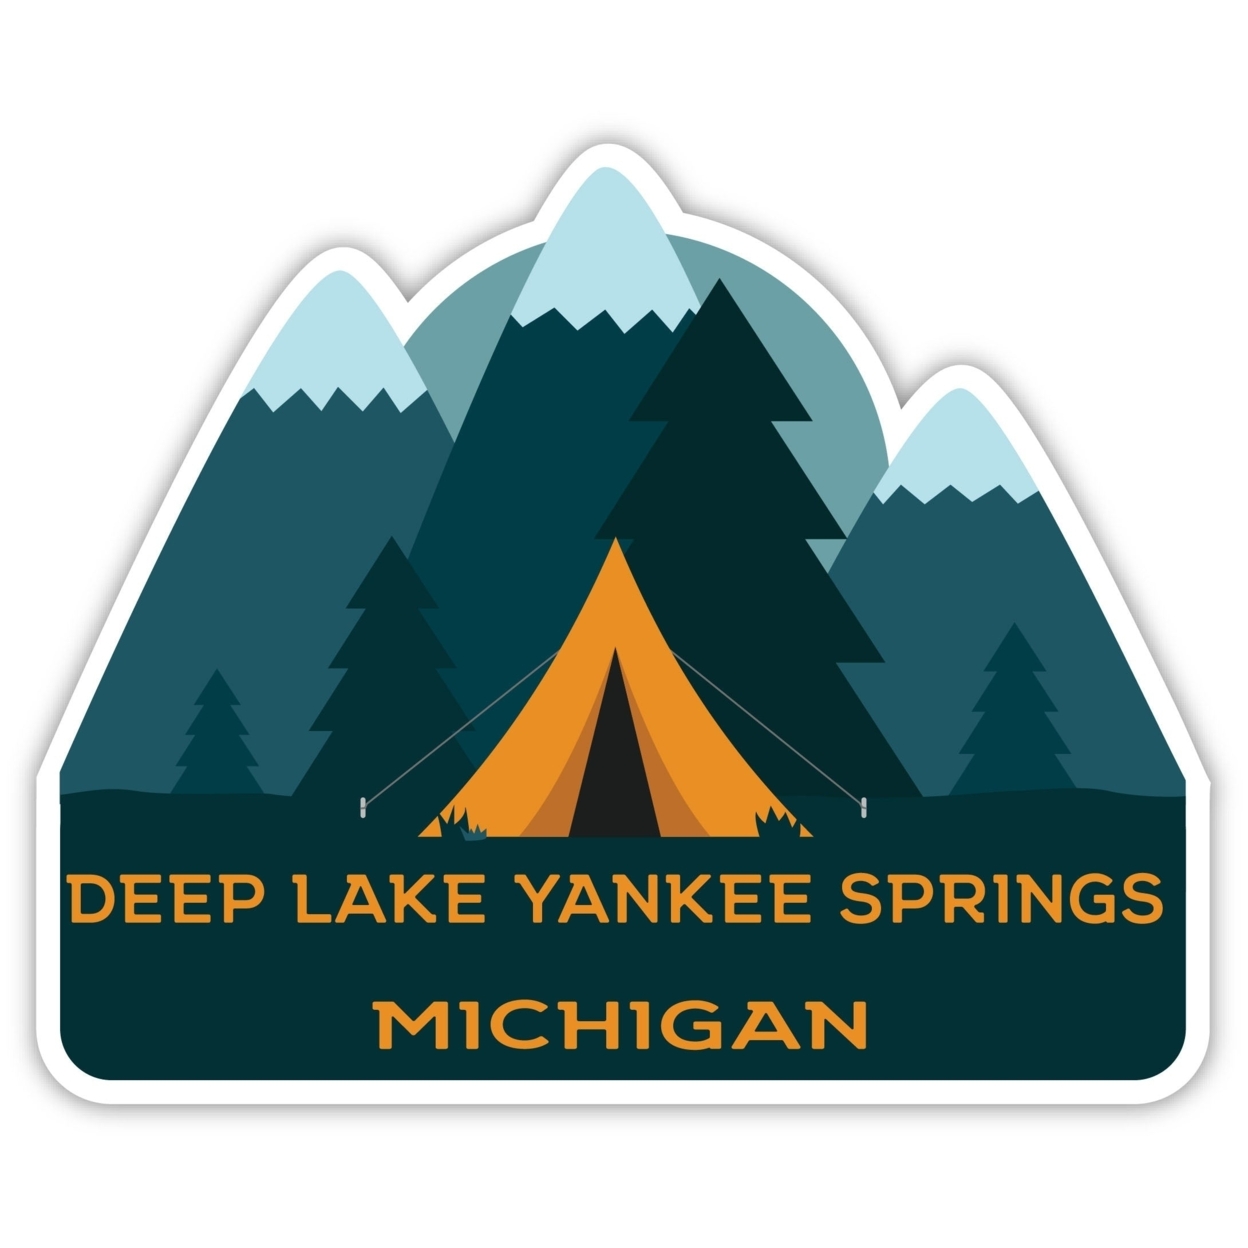 Deep Lake Yankee Springs Michigan Souvenir Decorative Stickers (Choose Theme And Size) - 4-Pack, 2-Inch, Tent